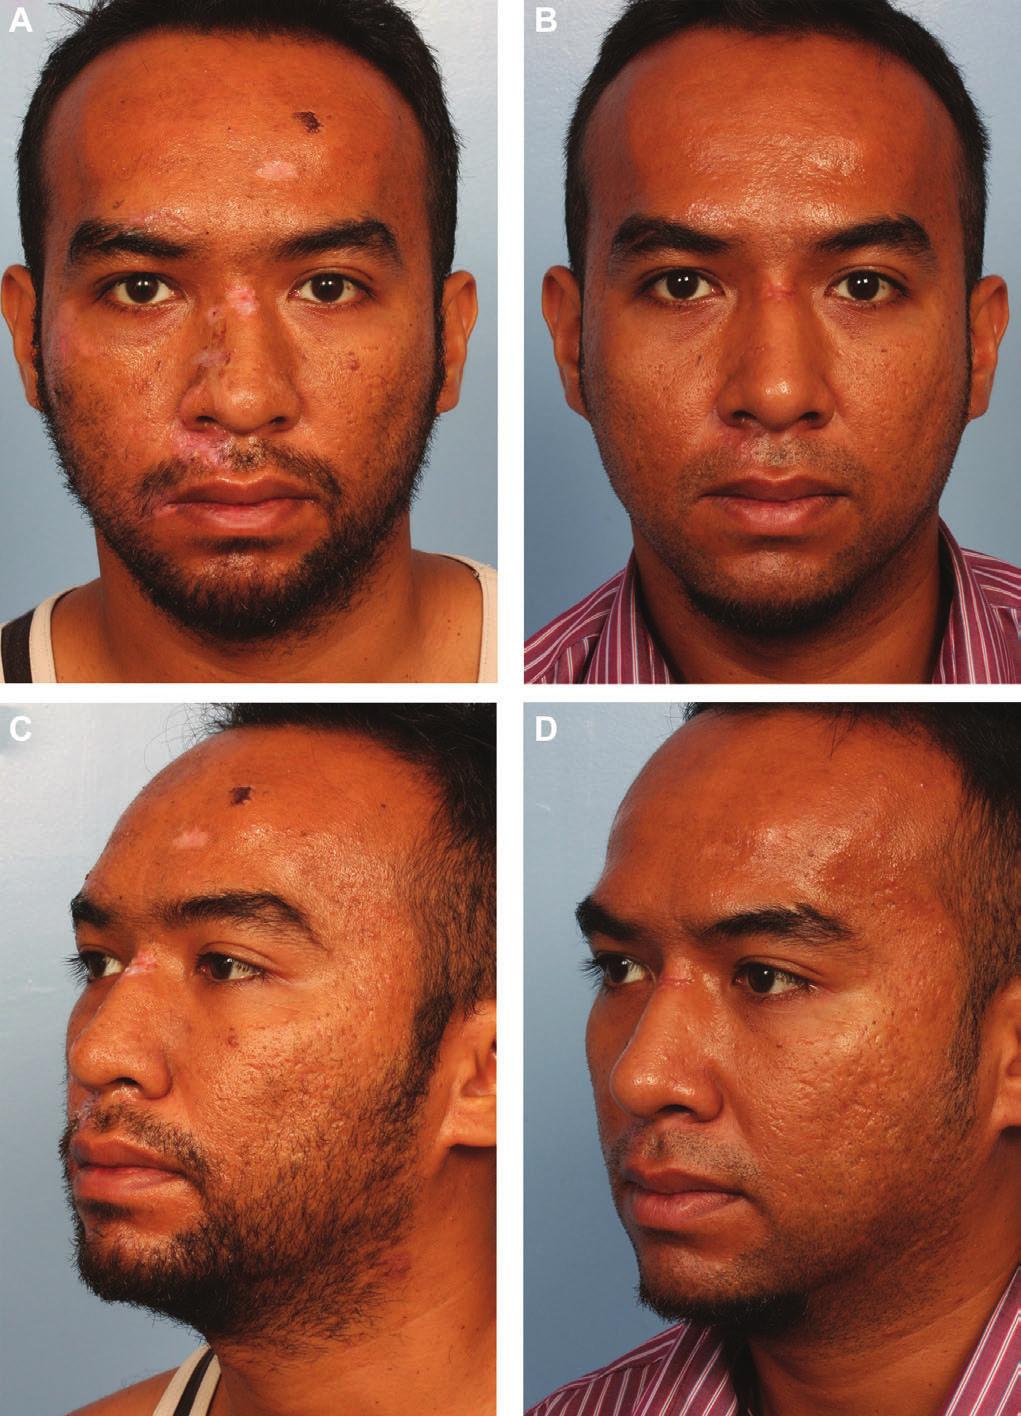 508 Aesthetic Surgery Journal 33(4) Figure 3. (A, C, E) This 34-year-old man was involved in a traffic accident.